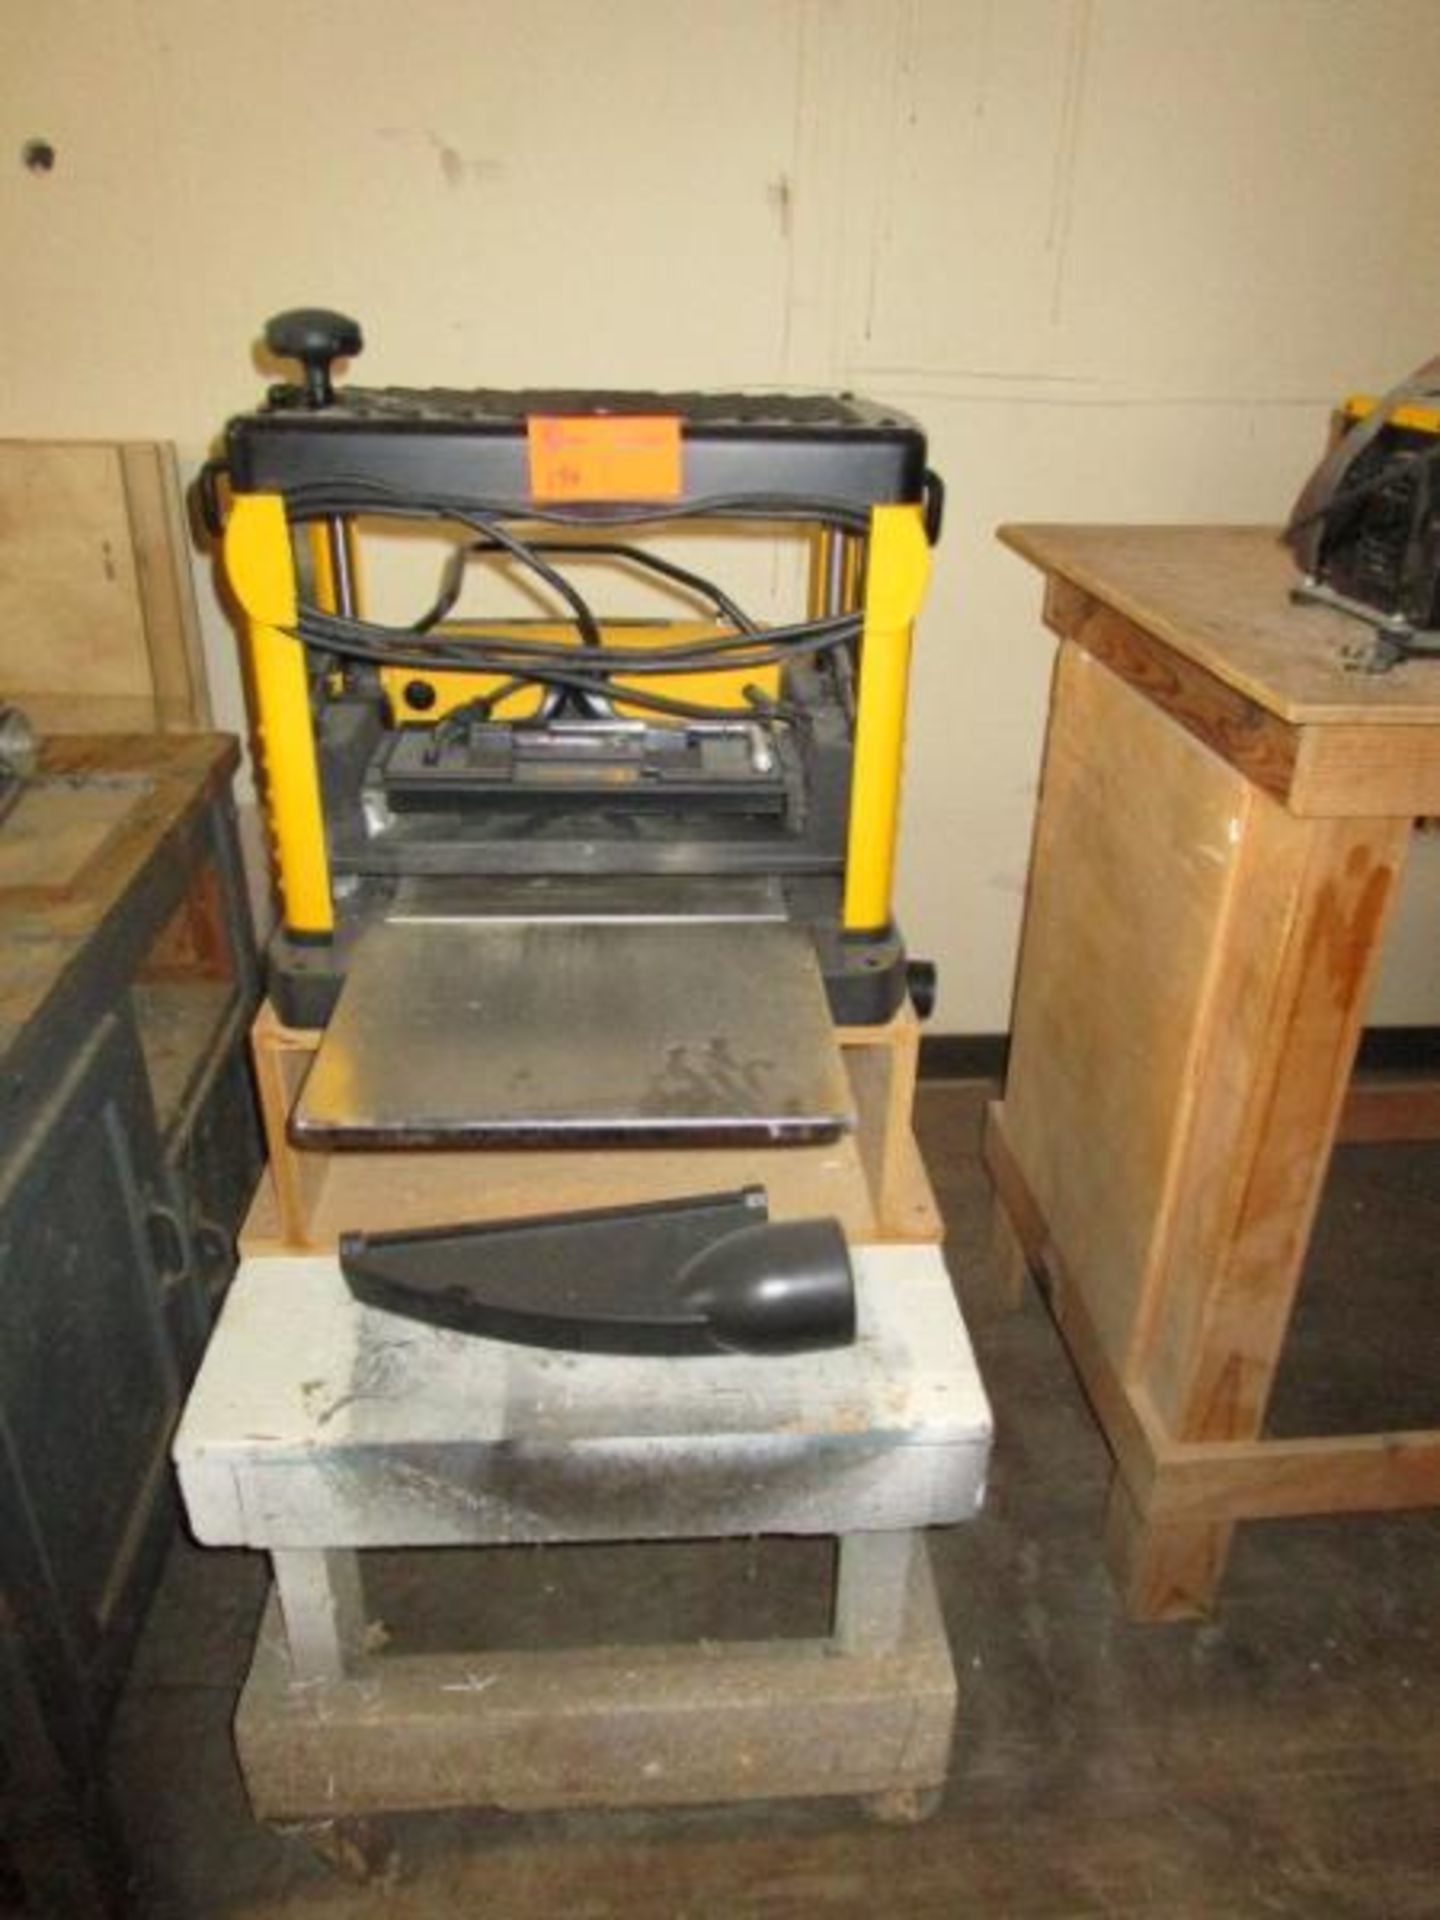 Thickness Planer w/ Stant by Delta, Model: DW733 - Image 2 of 7